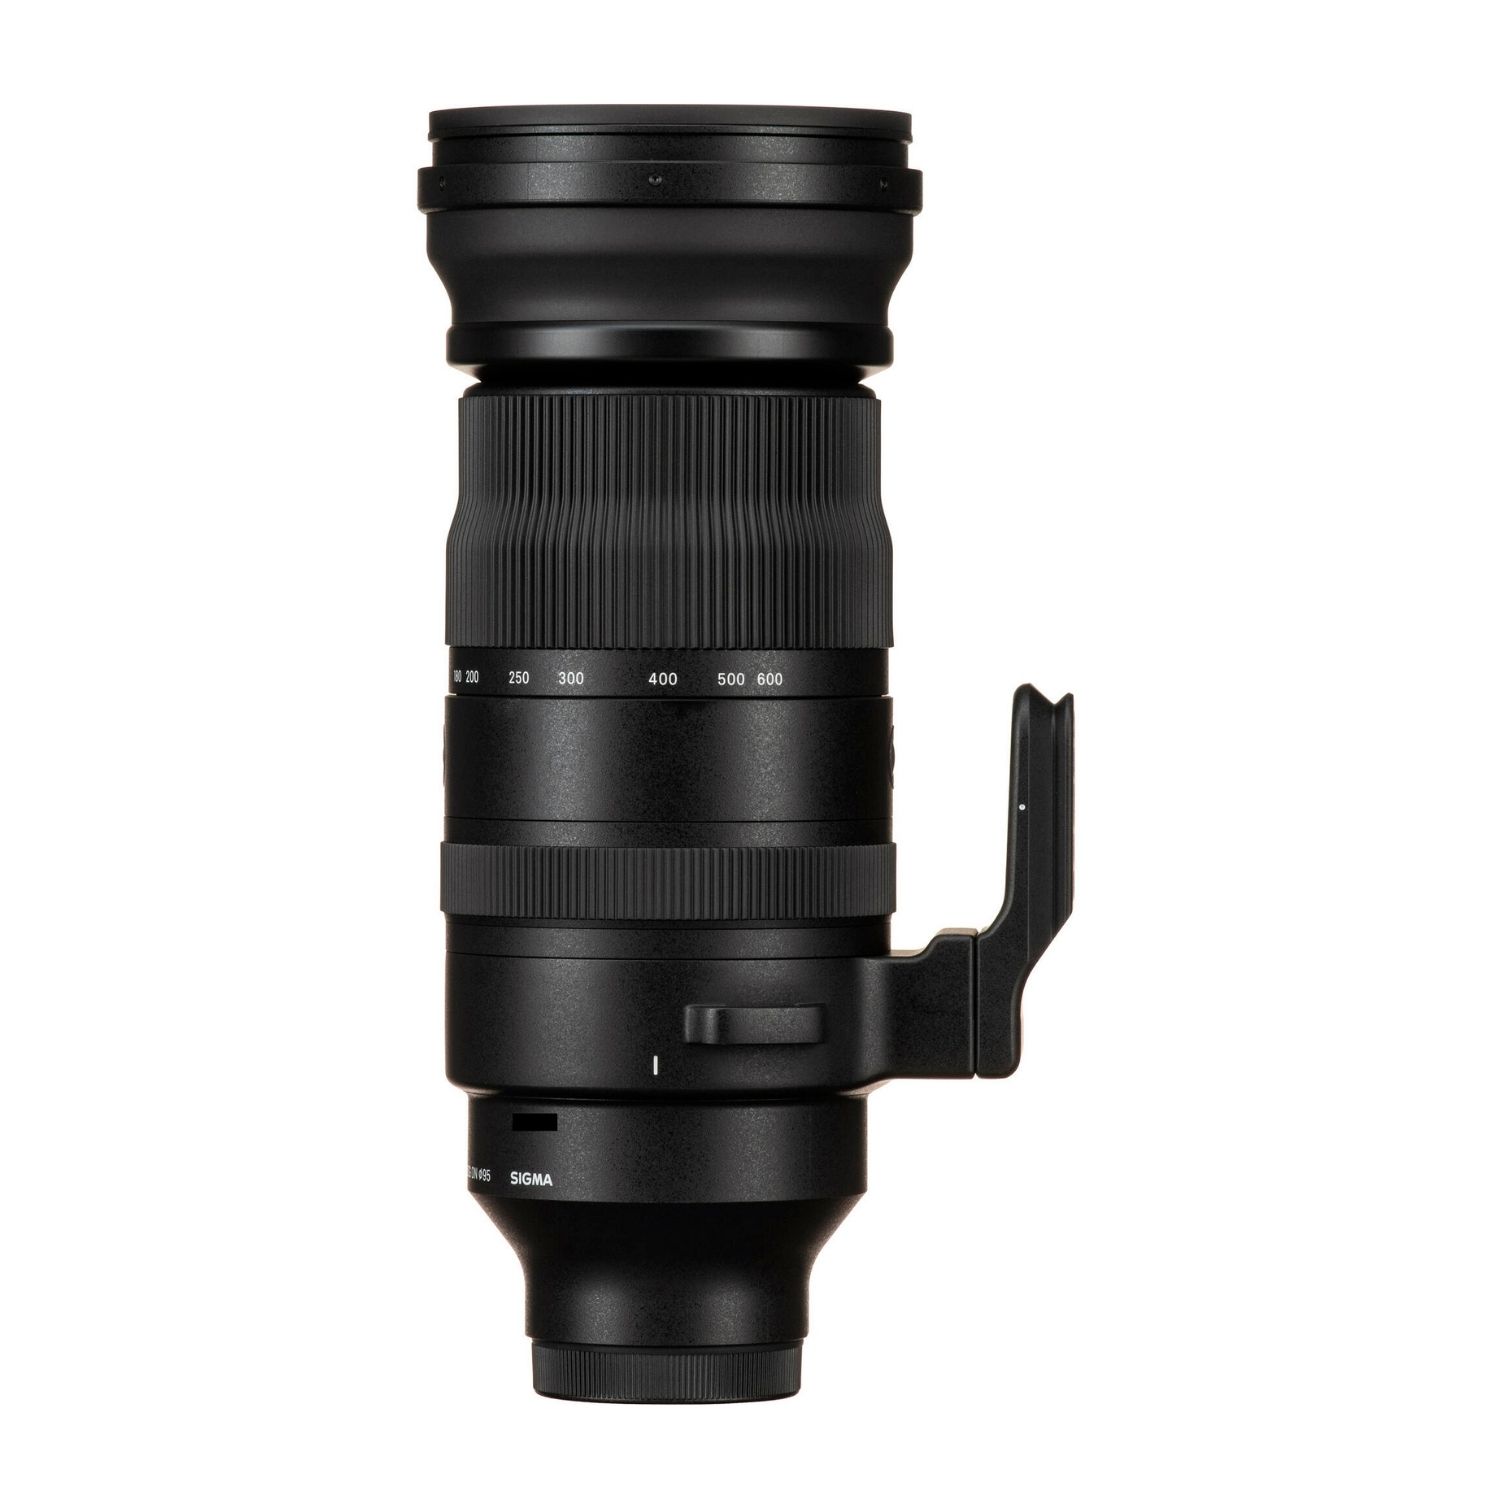 Sigma 150-600mm F5-6.3 DG DN OS Sports Lens for Sony E Mount